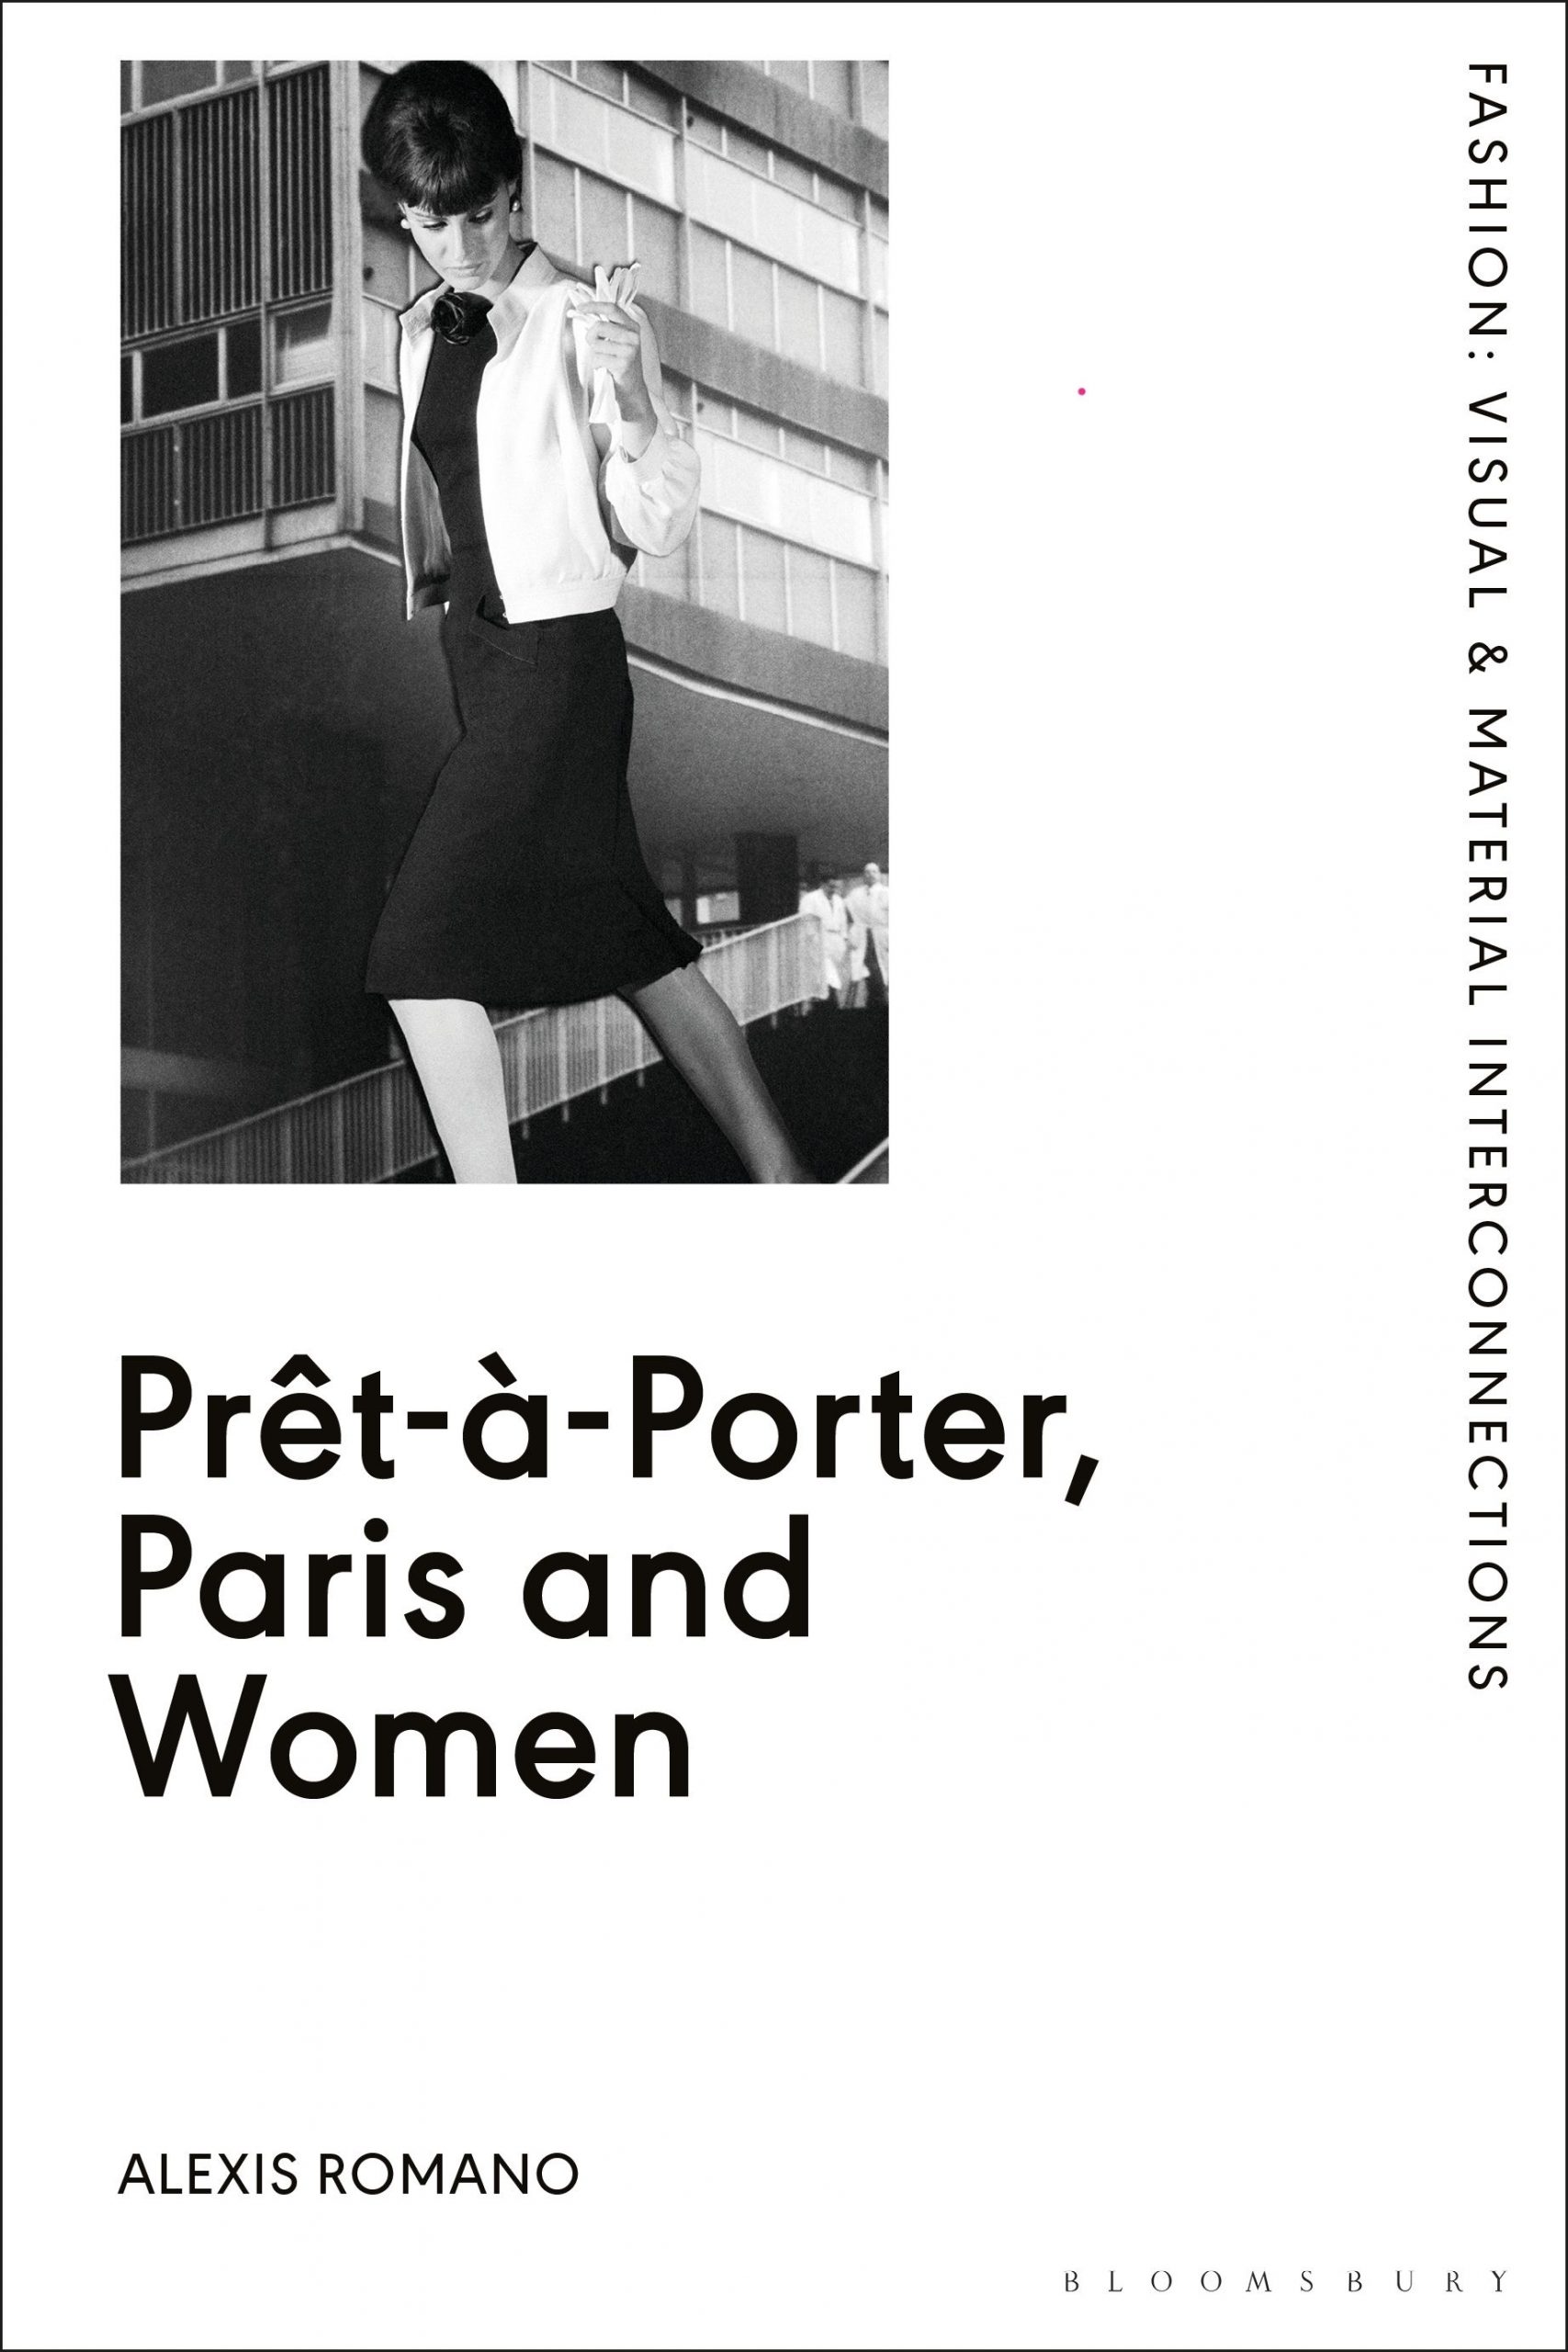 Prêt-à-Porter, Paris and Women: A Cultural Study of French Readymade Fashion